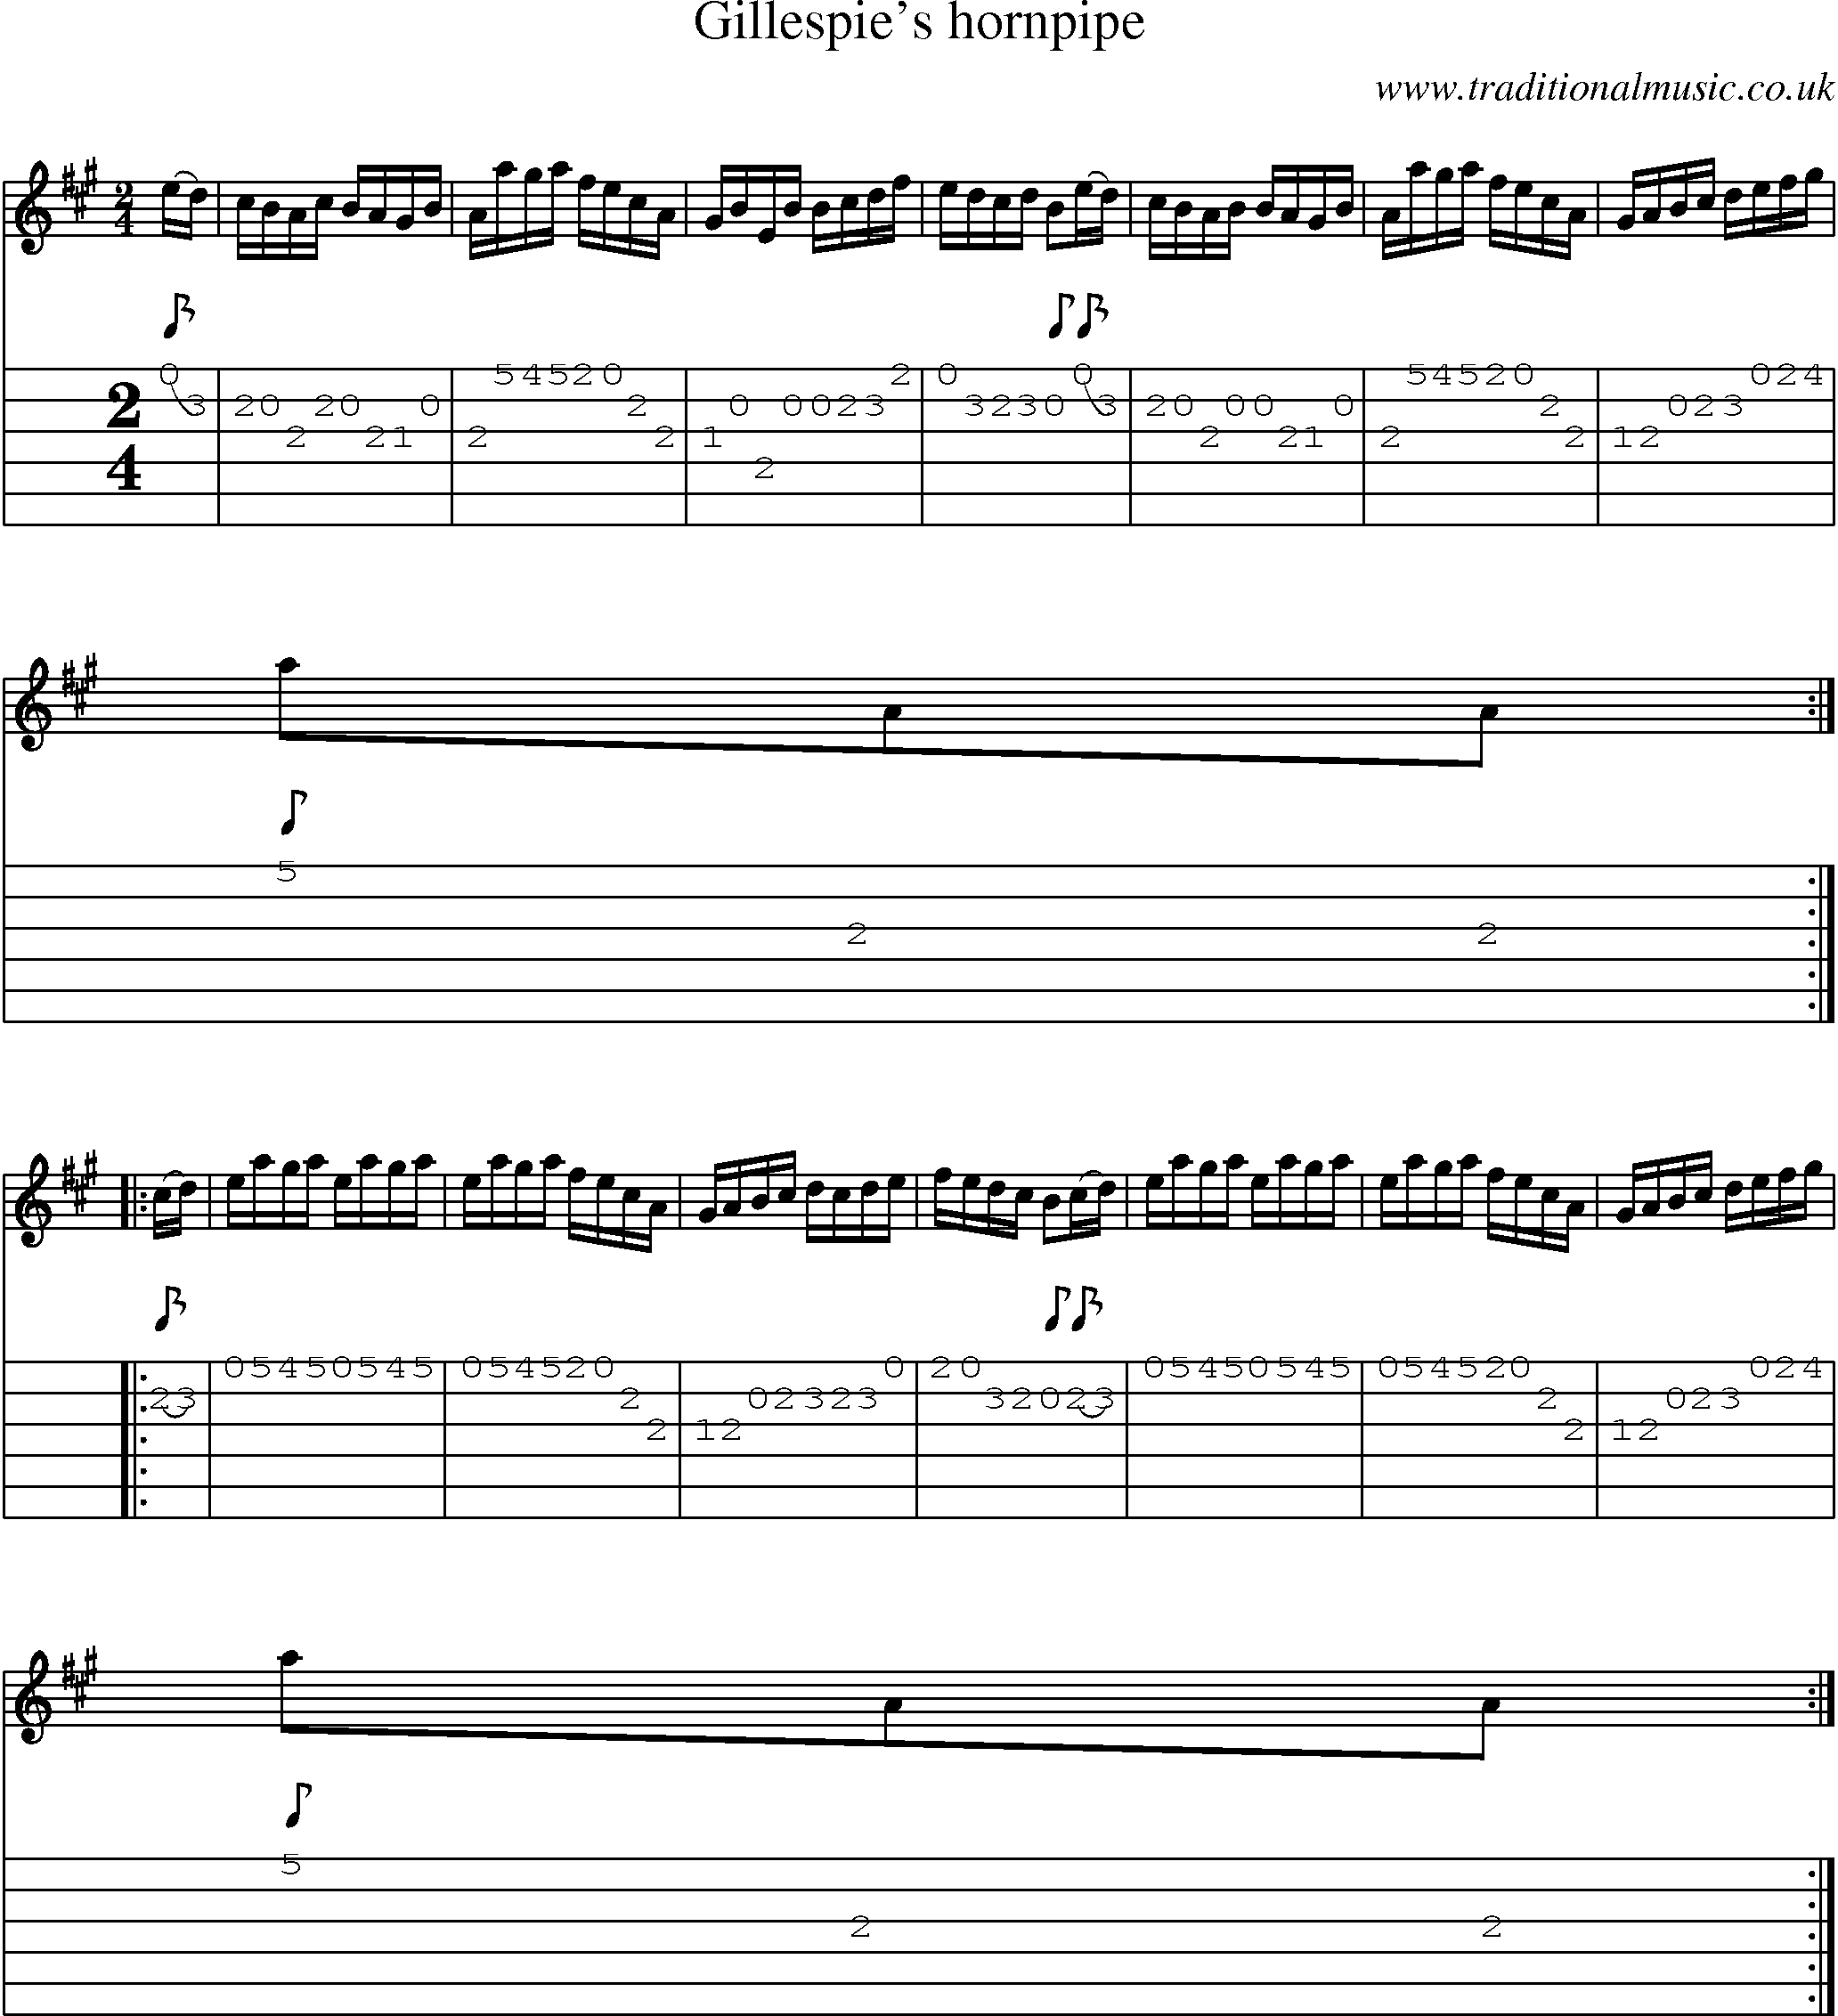 Music Score and Guitar Tabs for Gillespies Hornpipe